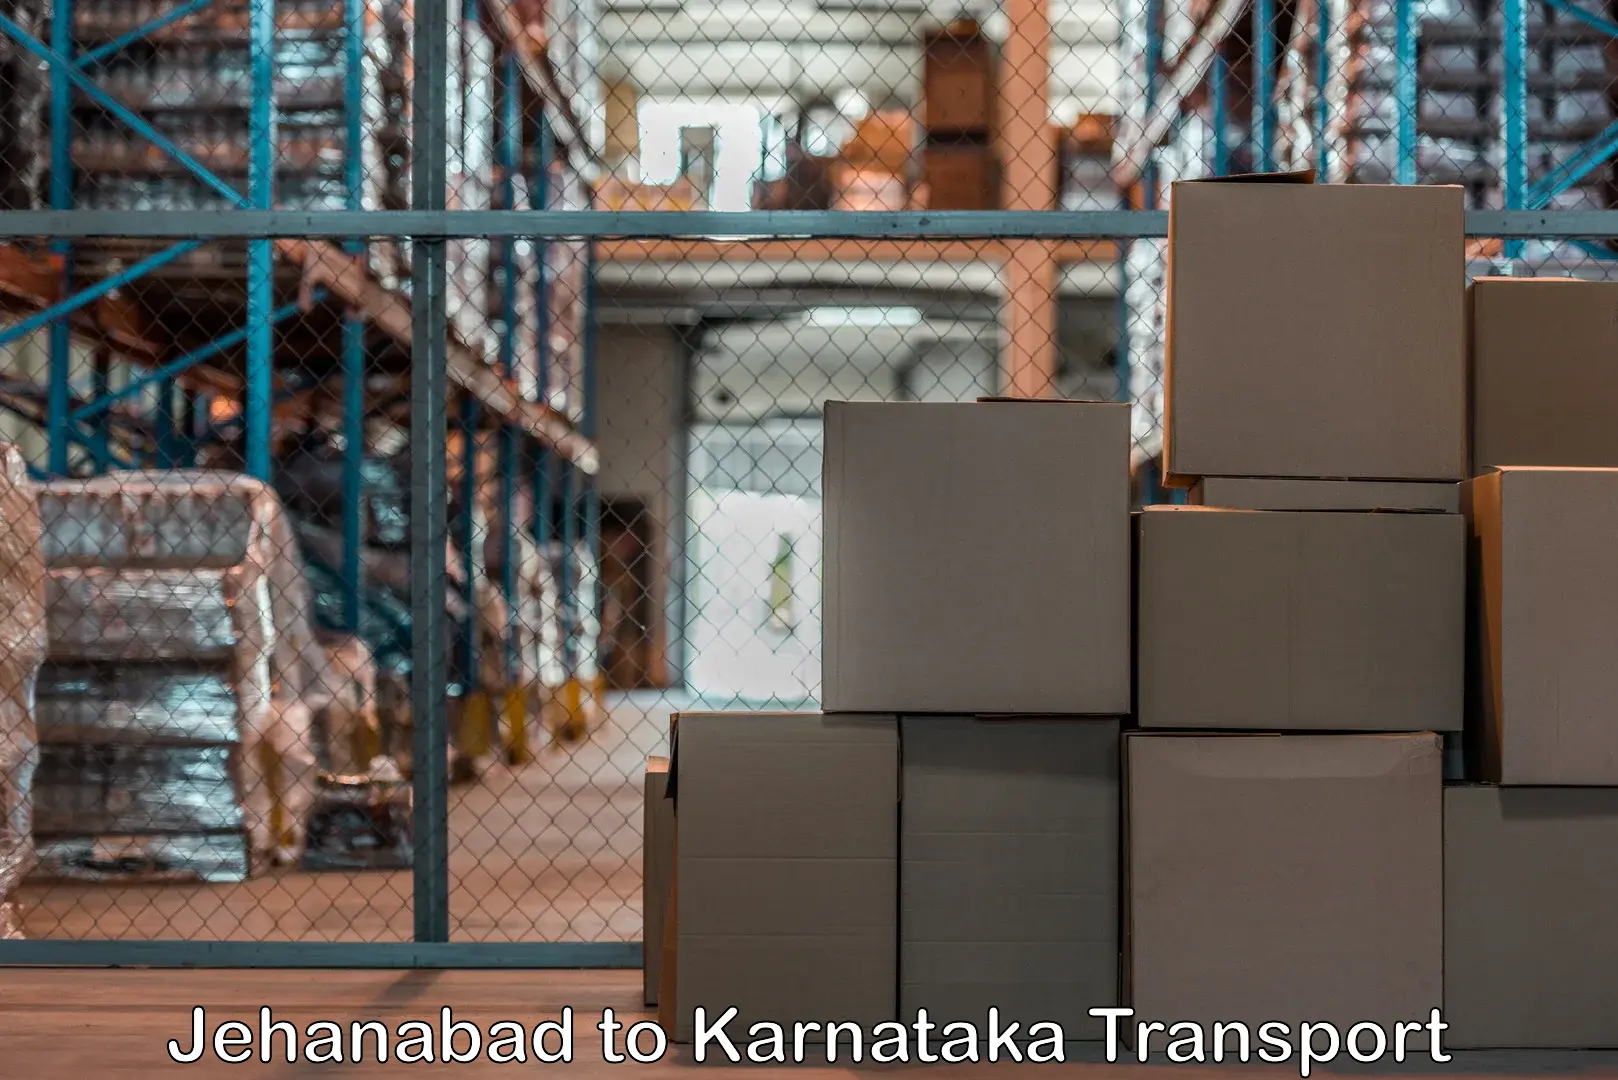 Express transport services in Jehanabad to Mangalore Port